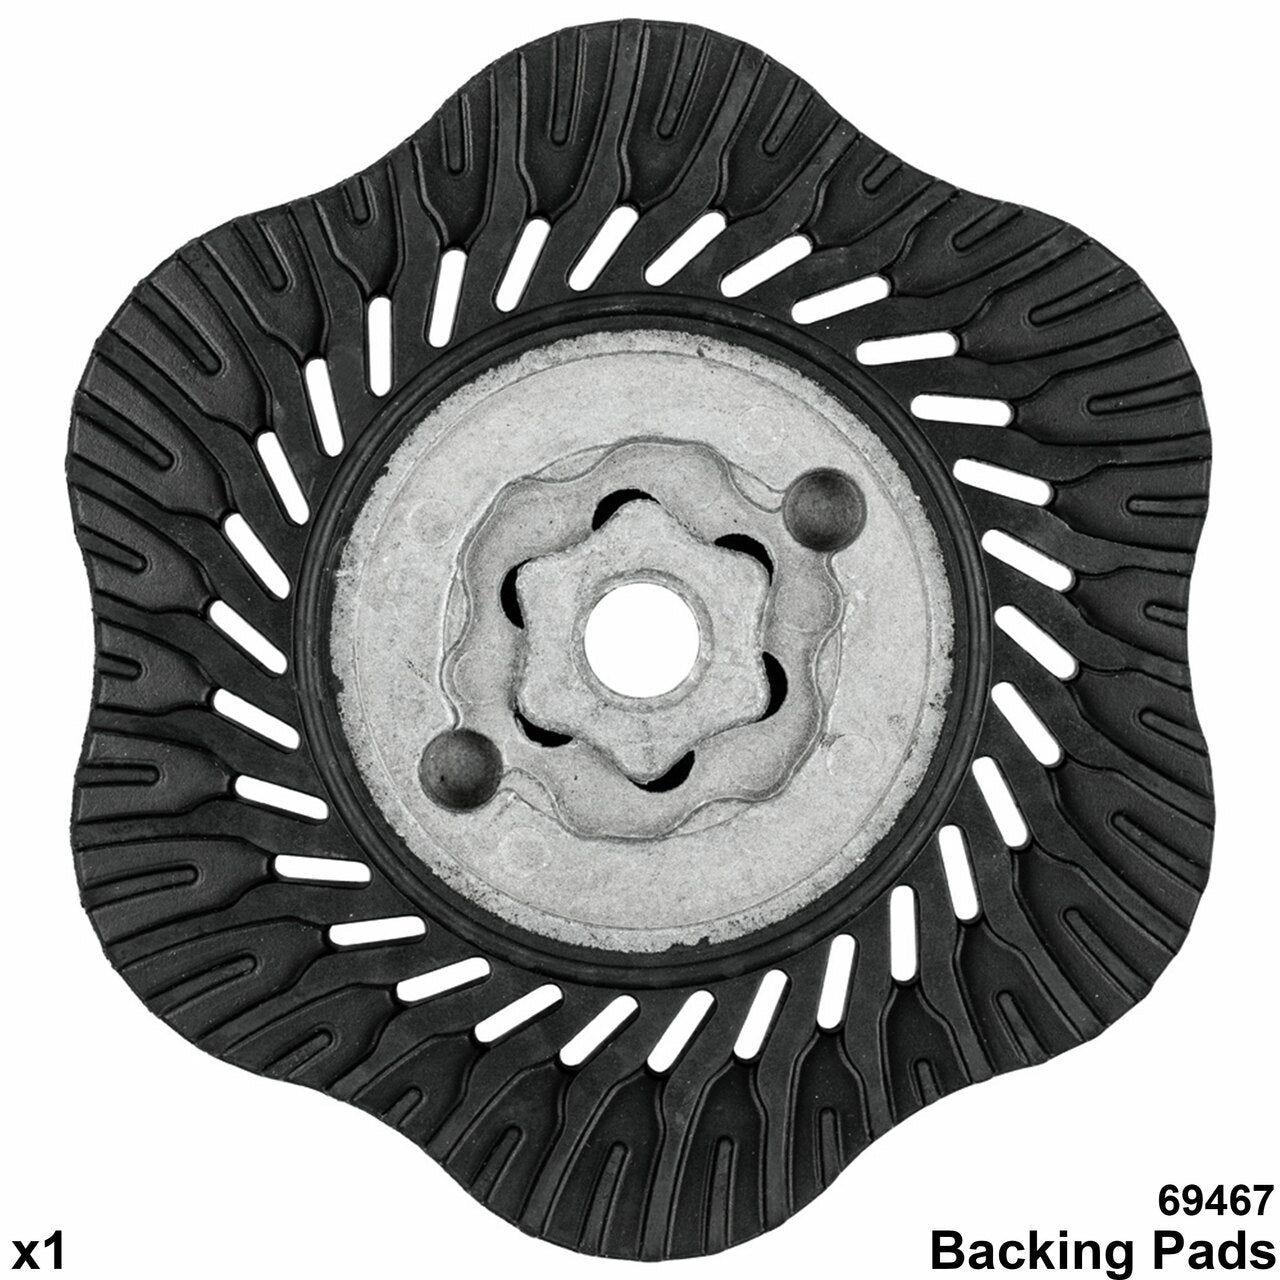 COMBICLICK® Surface Finishing Set - 4-1/2" Diameter Discs, 5/8-11 Threaded Backing Pad